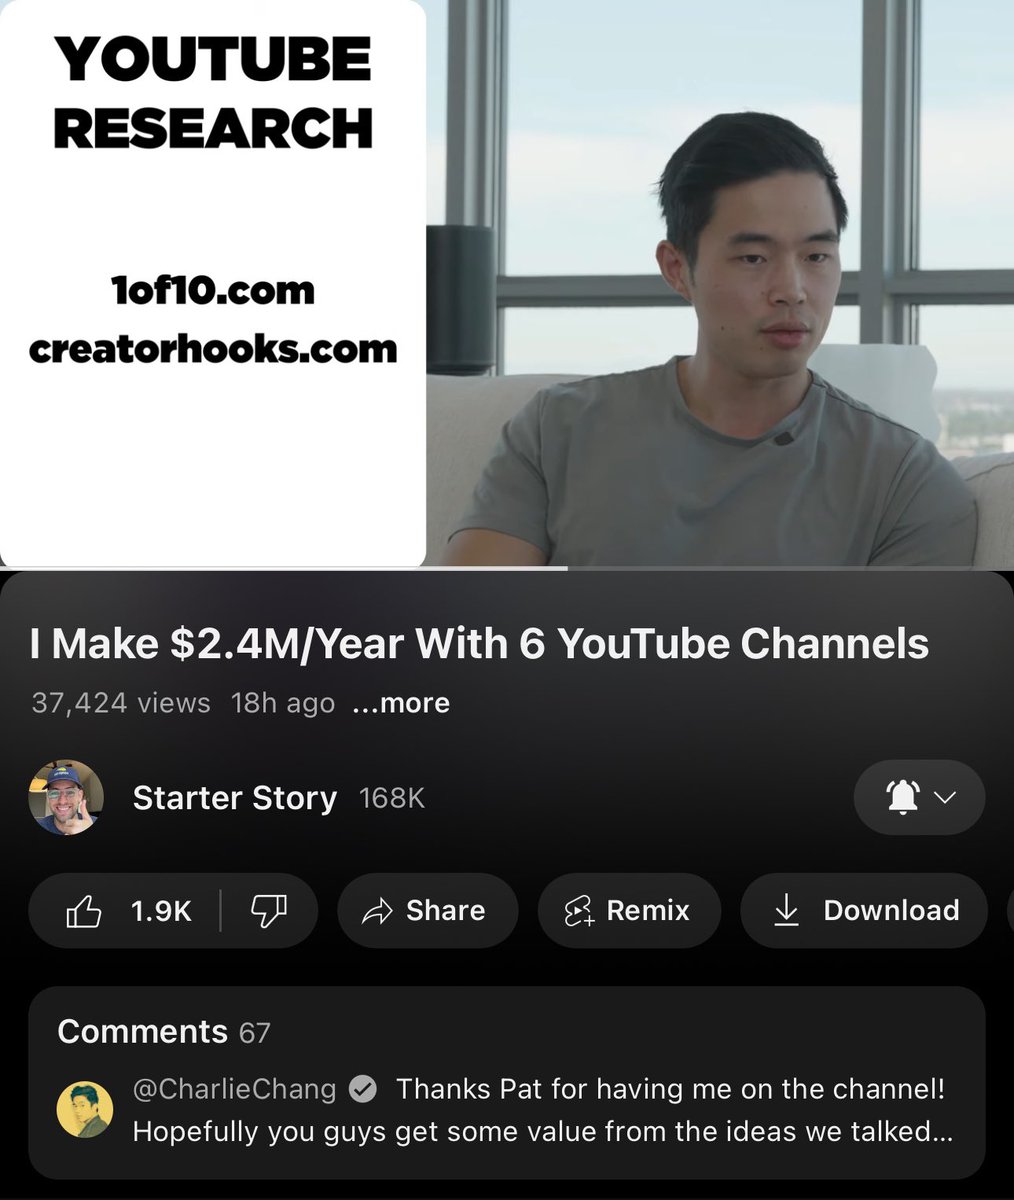 Watching newest @thepatwalls Starter Story about how @charlie__chang makes $2.4M/yr with 6 YouTube channels Tools: @jthomas__ Creator Hooks @Richard_YTS 1of10